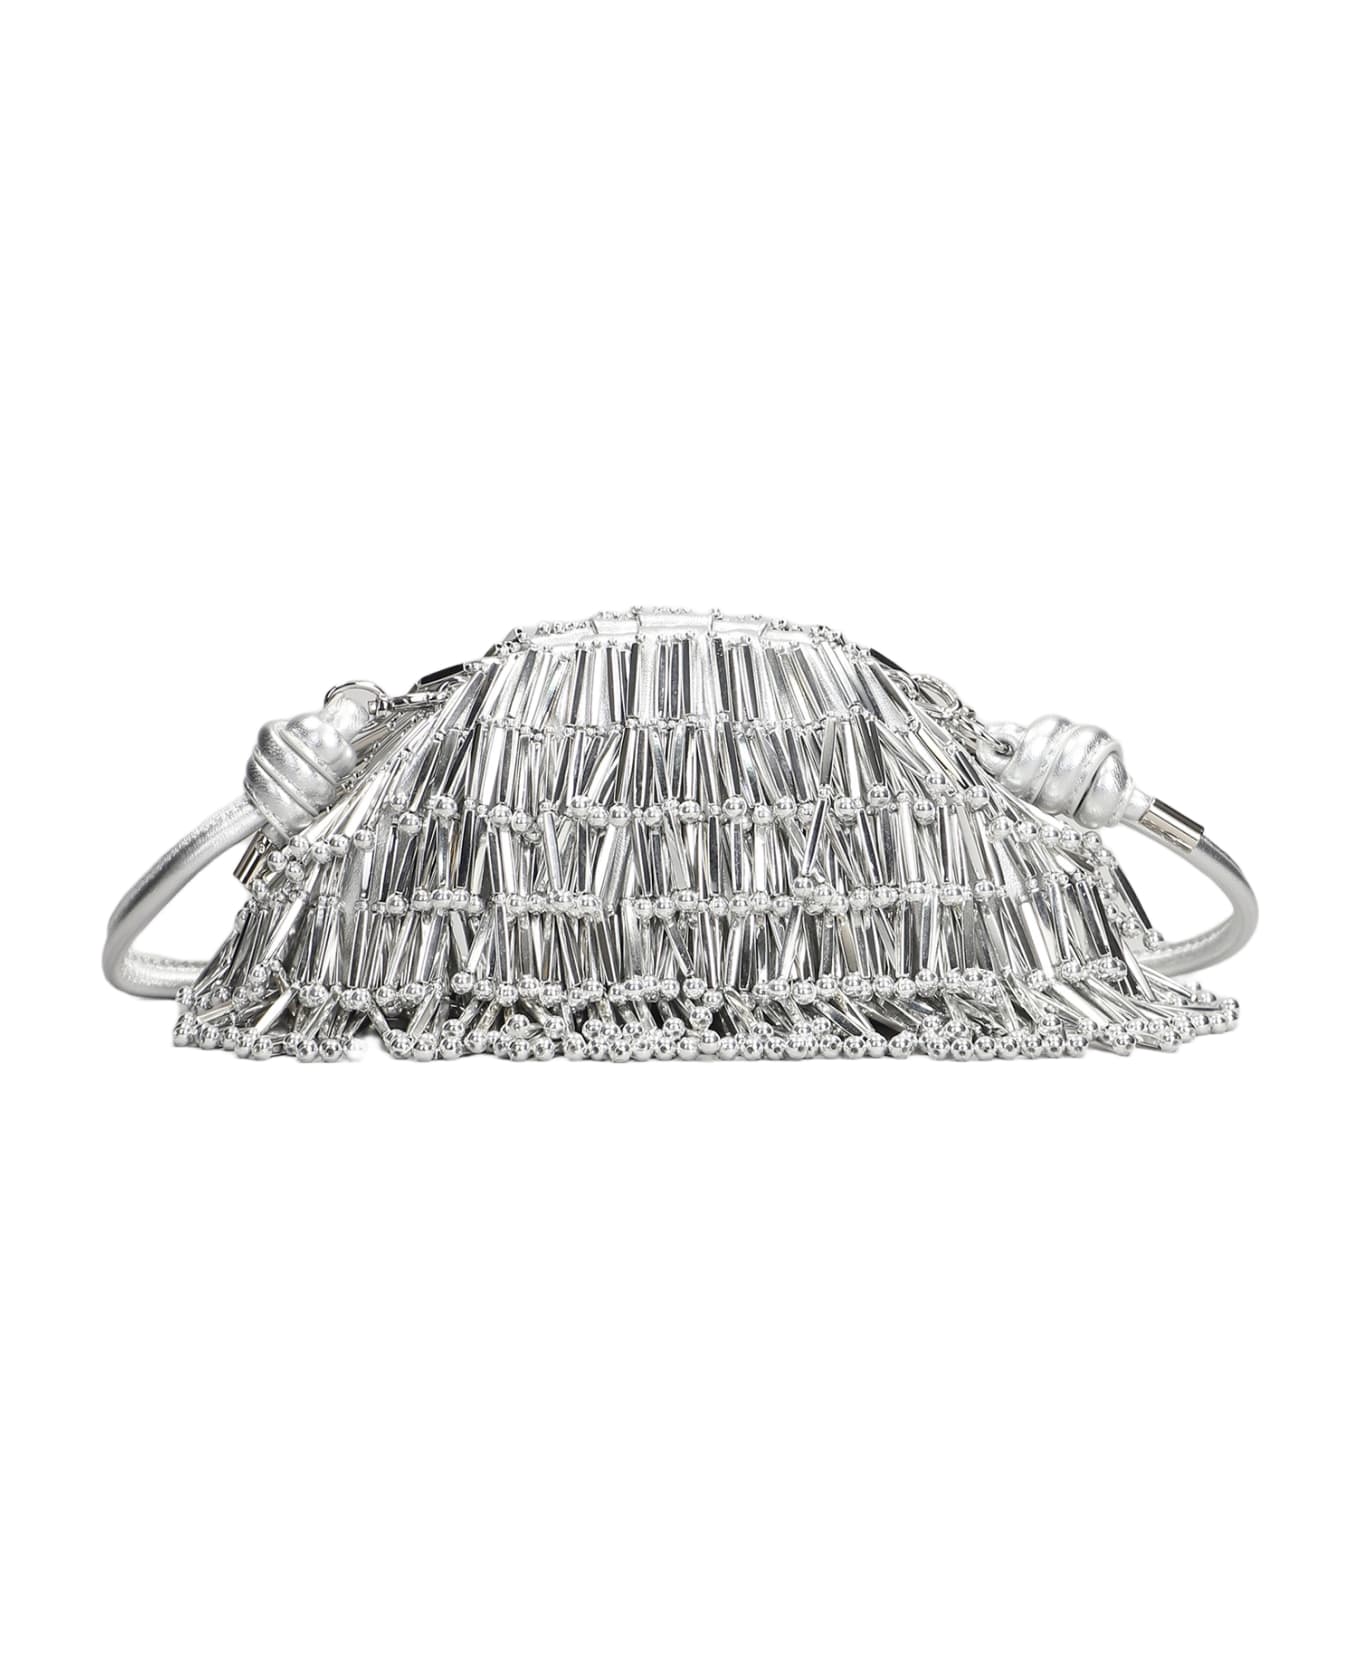 Cult Gaia Jaala Hand Bag In Silver Leather - silver